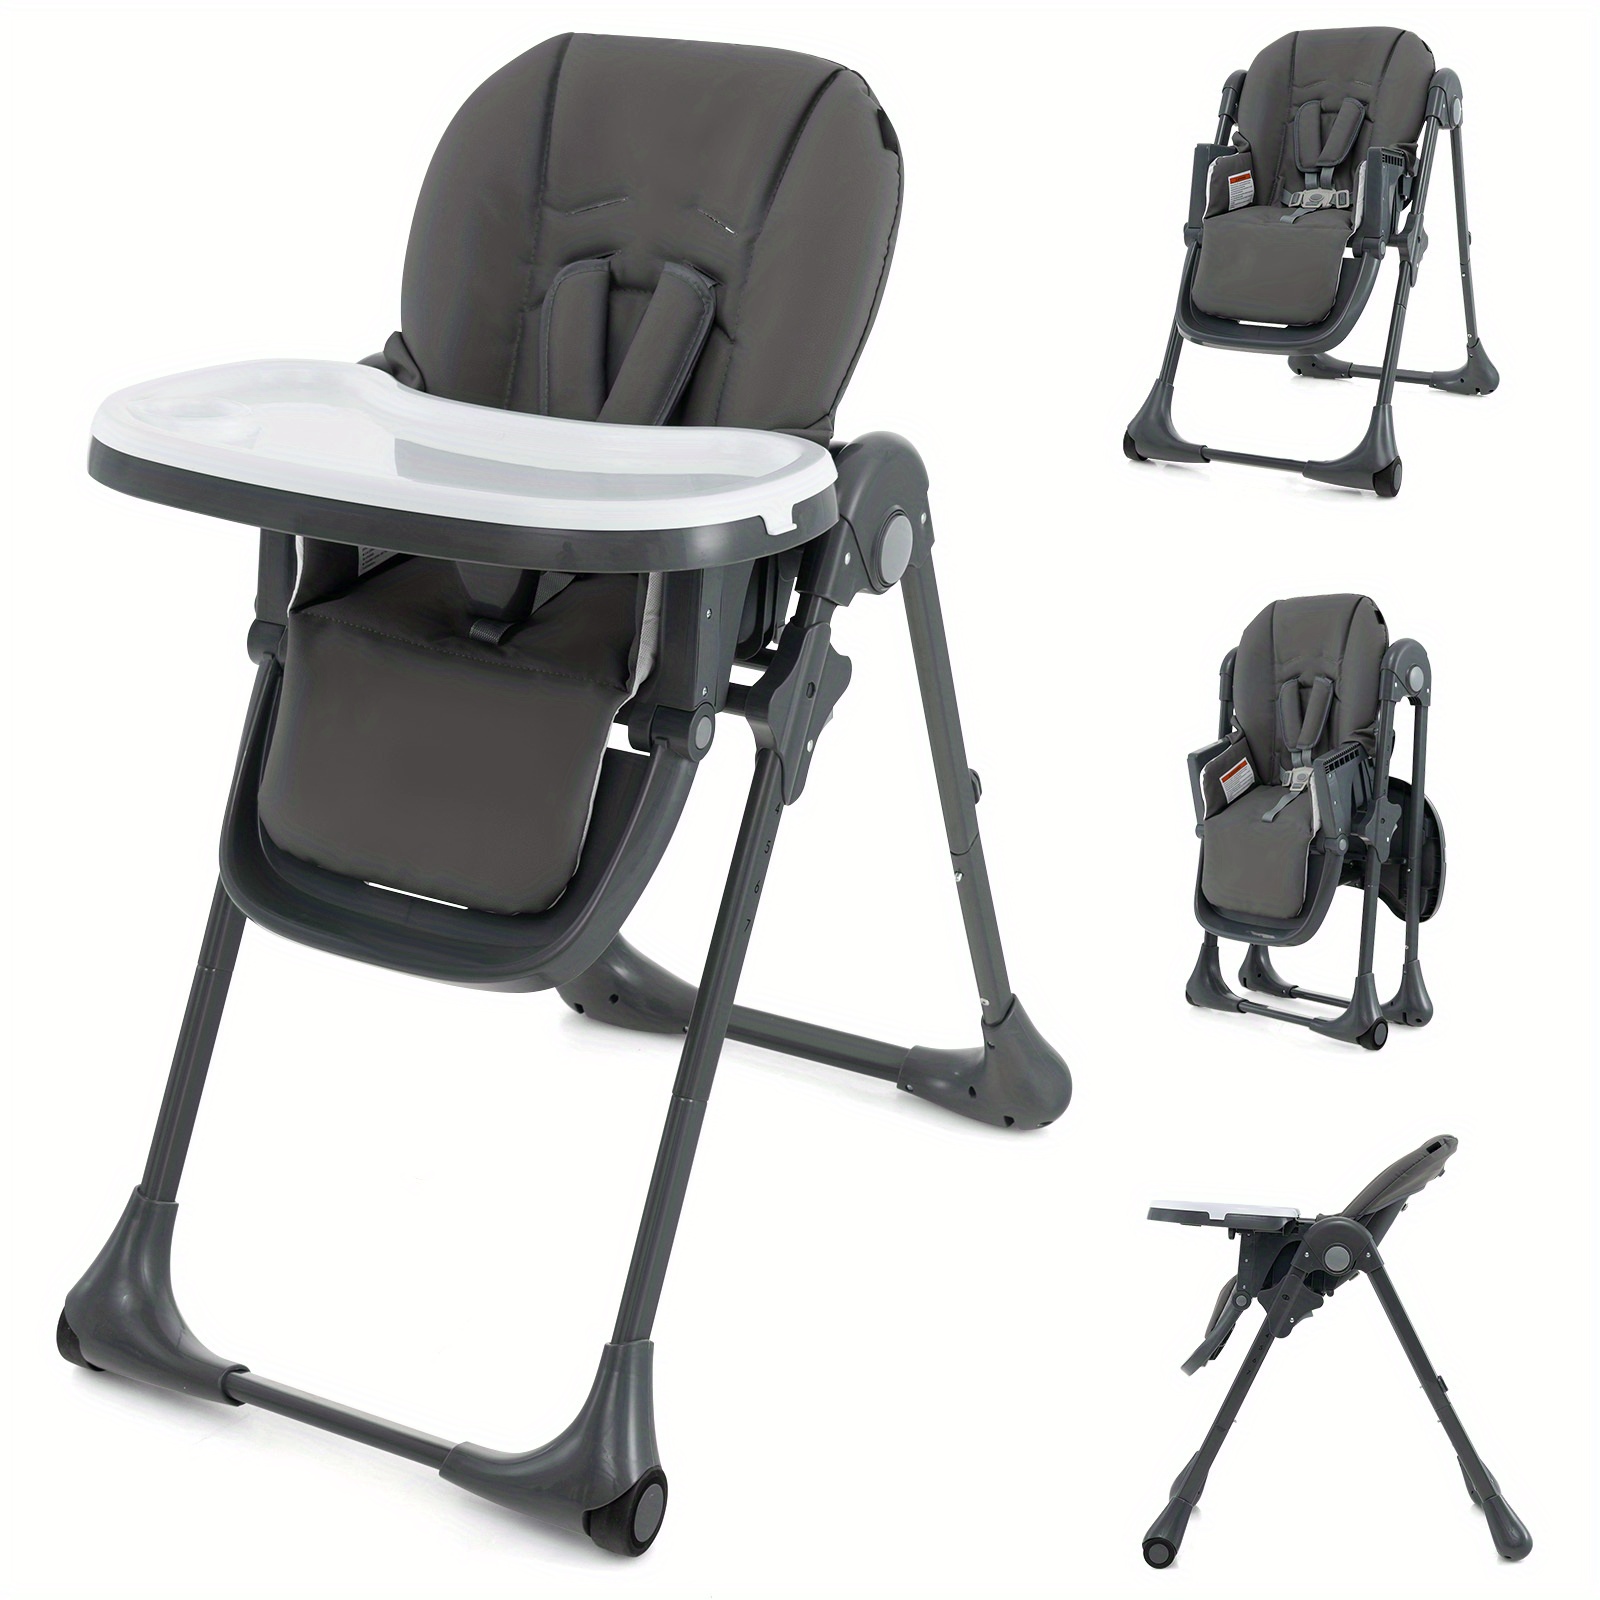 

Lifezeal Baby High Chair With 7 Height & 3 Footrest Adjustable Cup Holder 2 Wheels